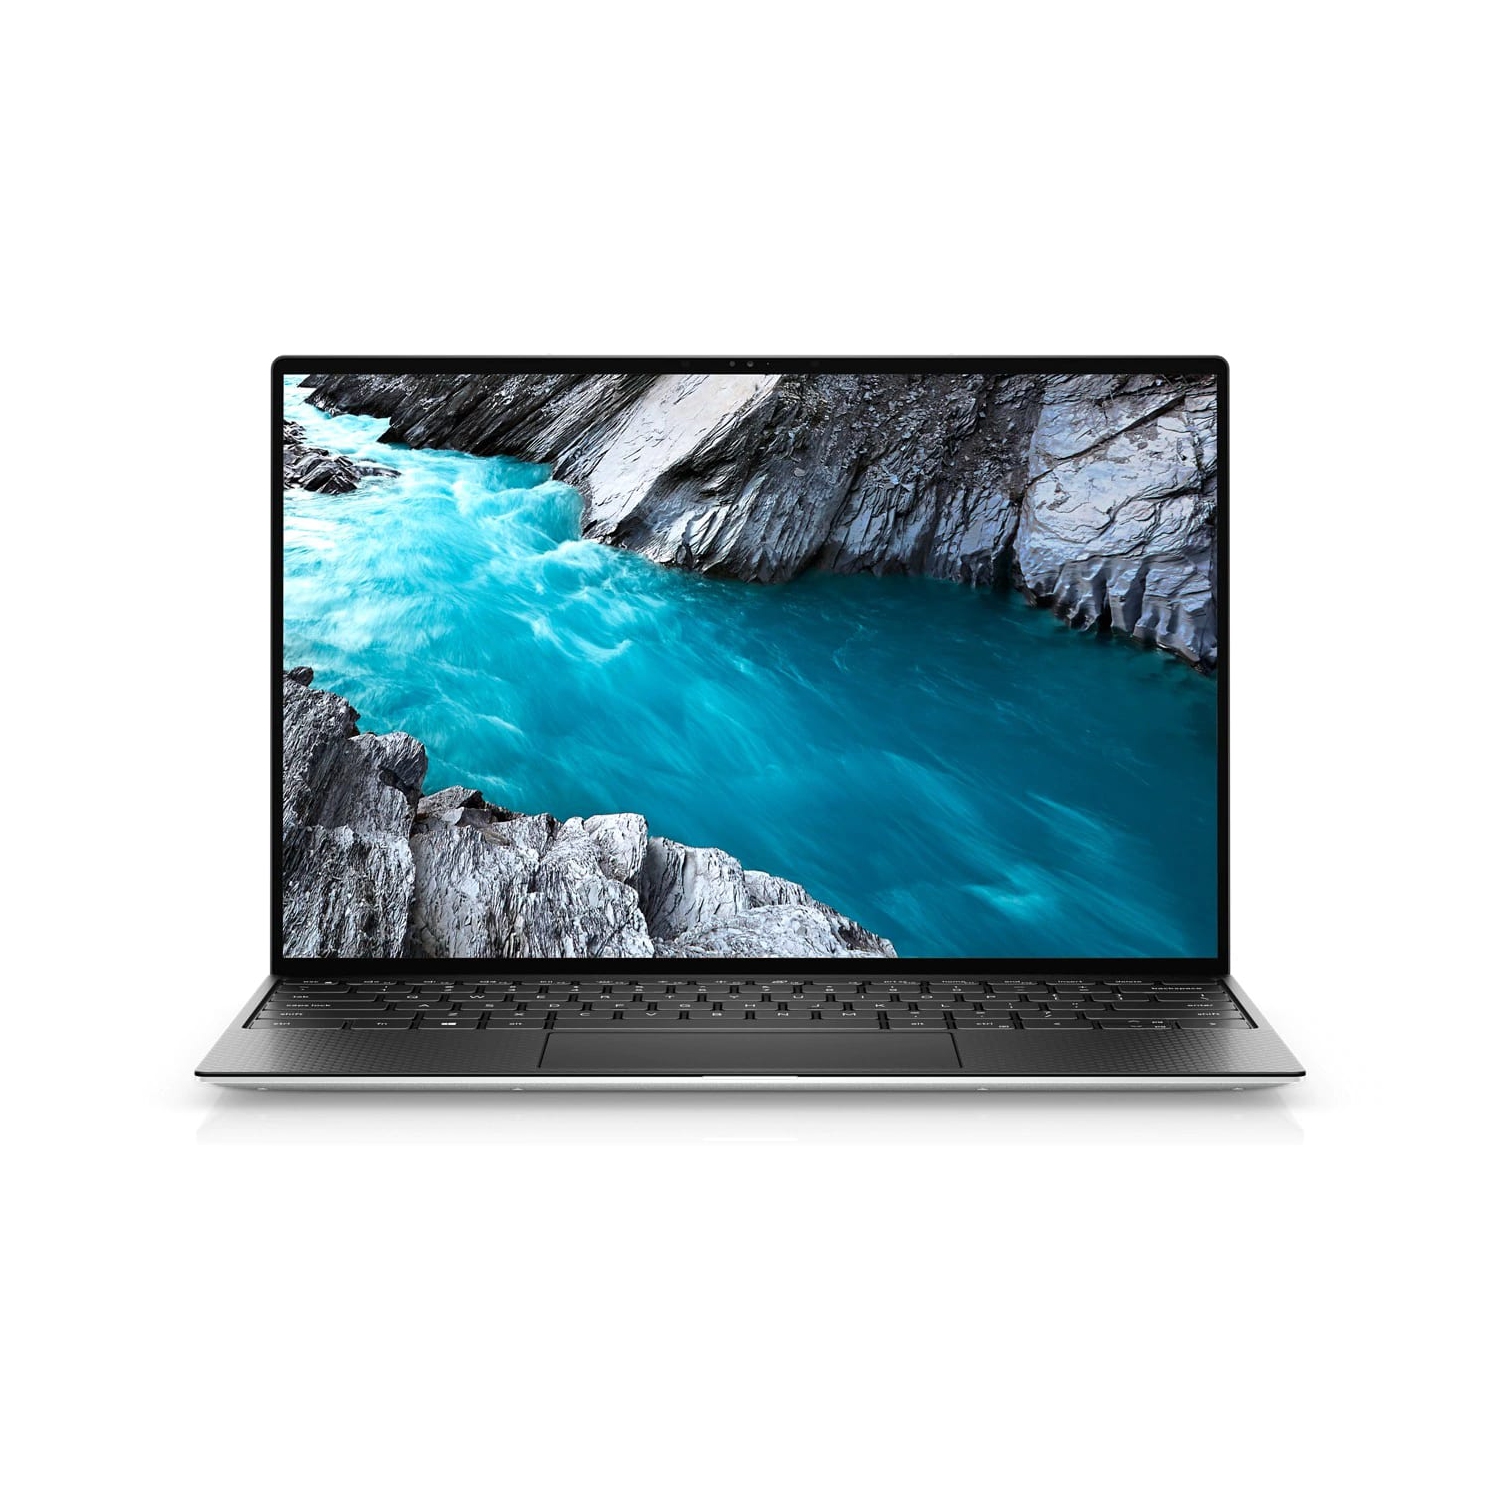 Refurbished (Excellent) - Dell XPS 13 9310 Laptop (2020) | 13.4" FHD+ | Core i3 - 256GB SSD - 8GB RAM | 2 Cores @ 4.1 GHz - 11th Gen CPU Certified Refurbished